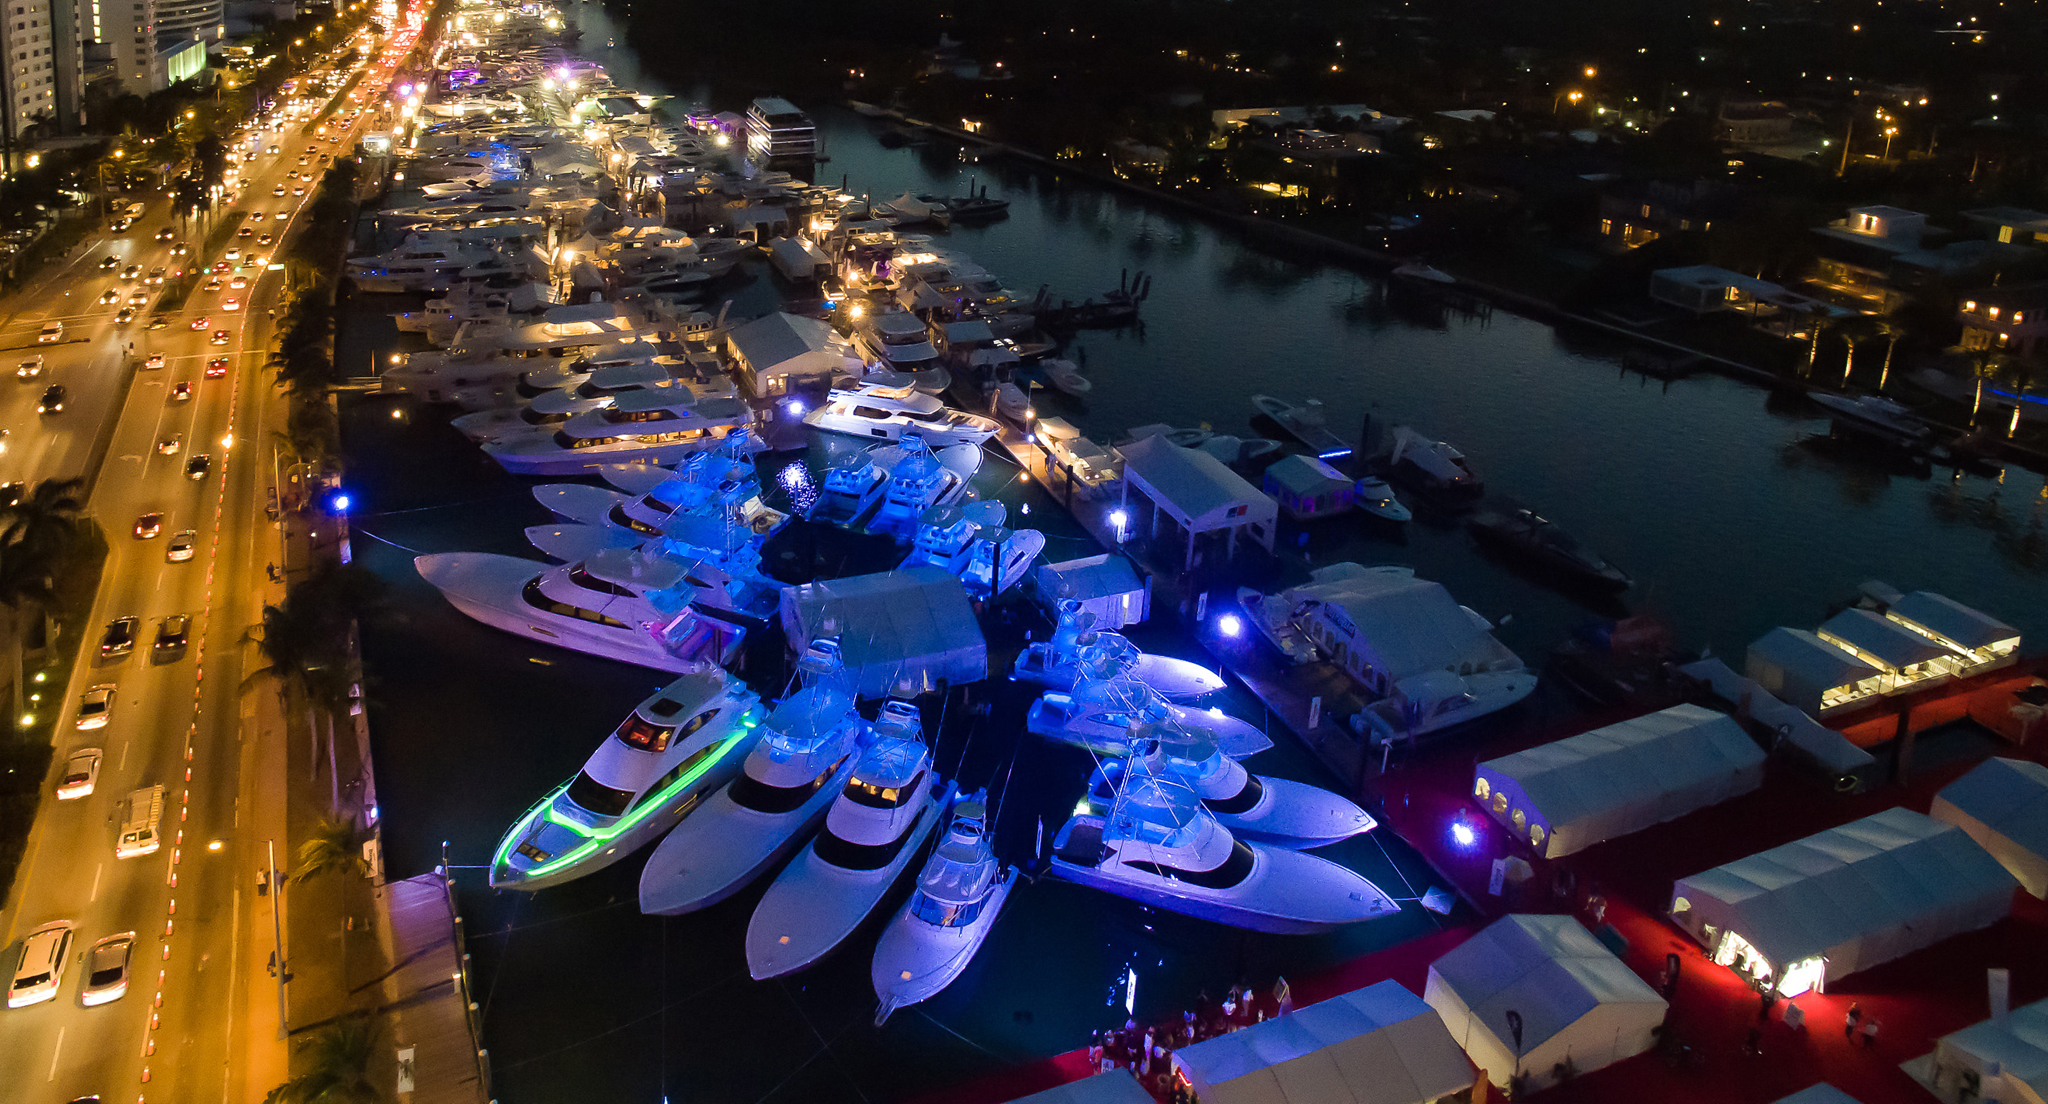 yachts events